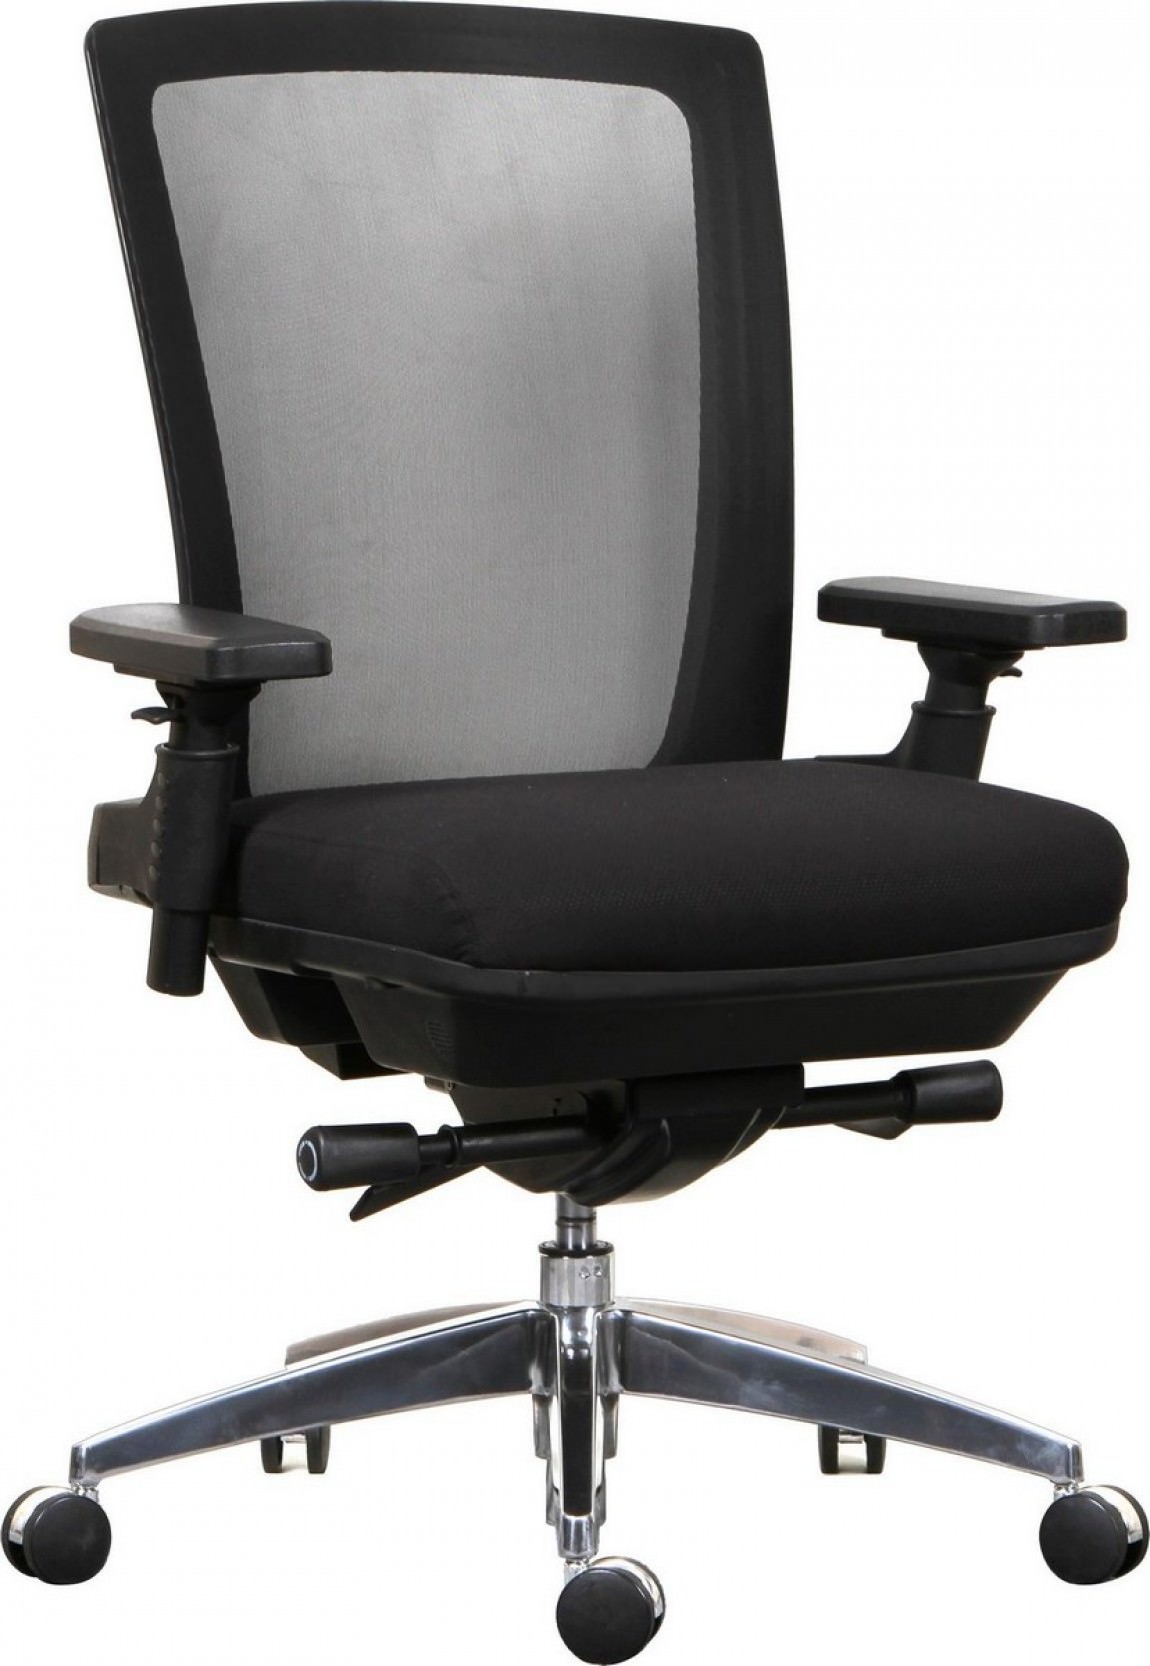 Heavy Duty Executive Mesh Back Office Chair Adjustable Arms : Express